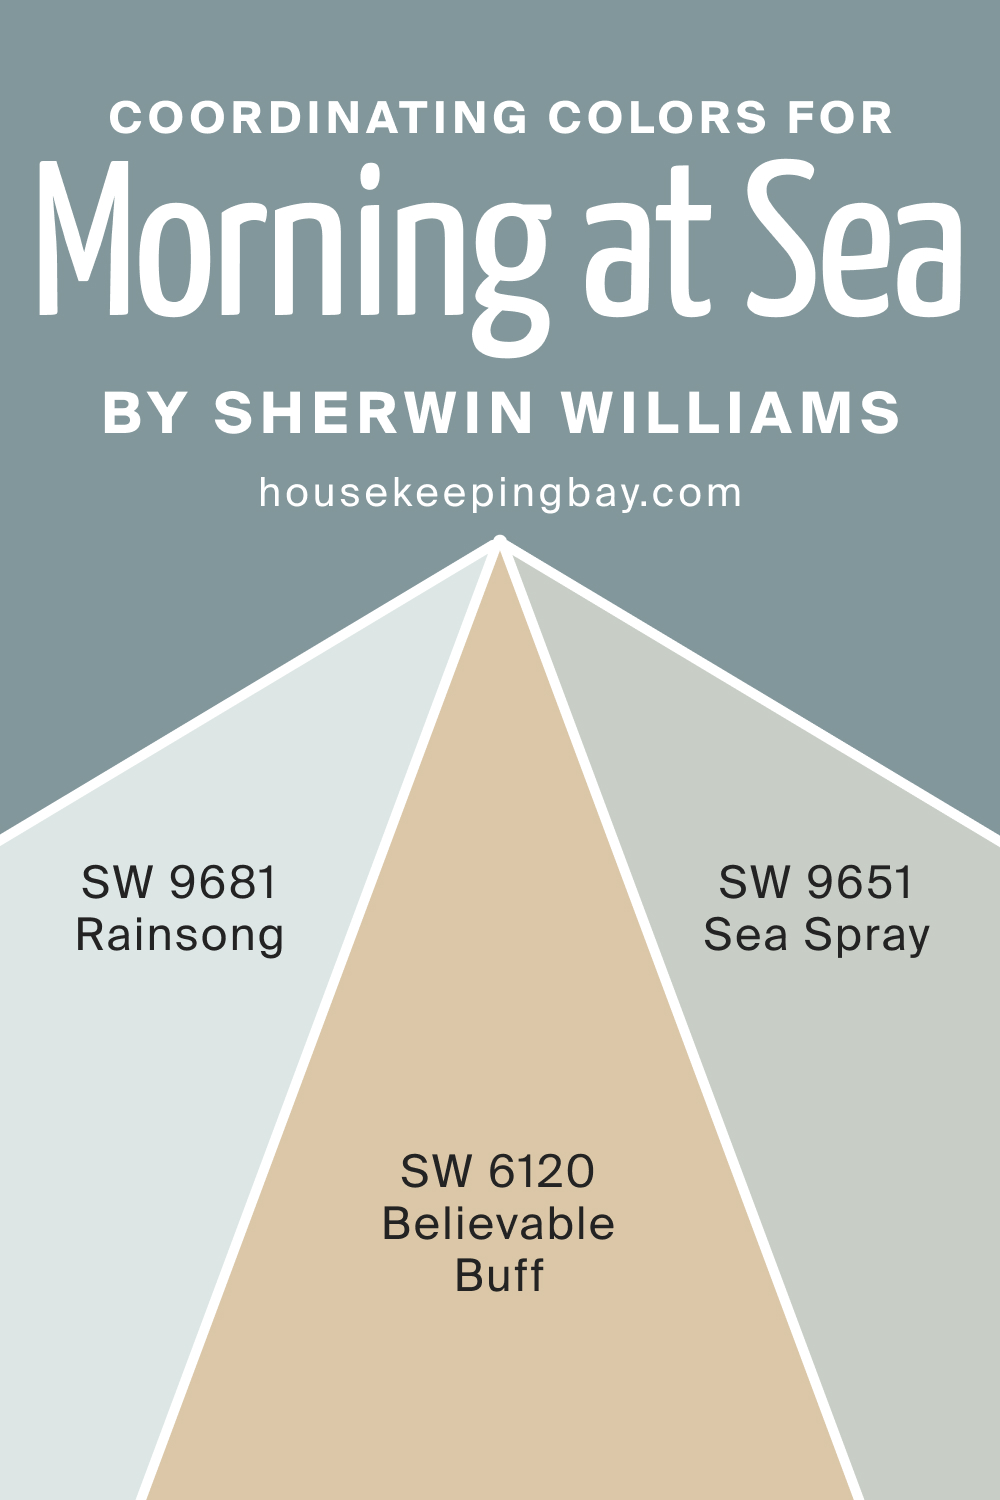 Coordinating Colors for SW 9634 Morning at Sea by Sherwin Williams